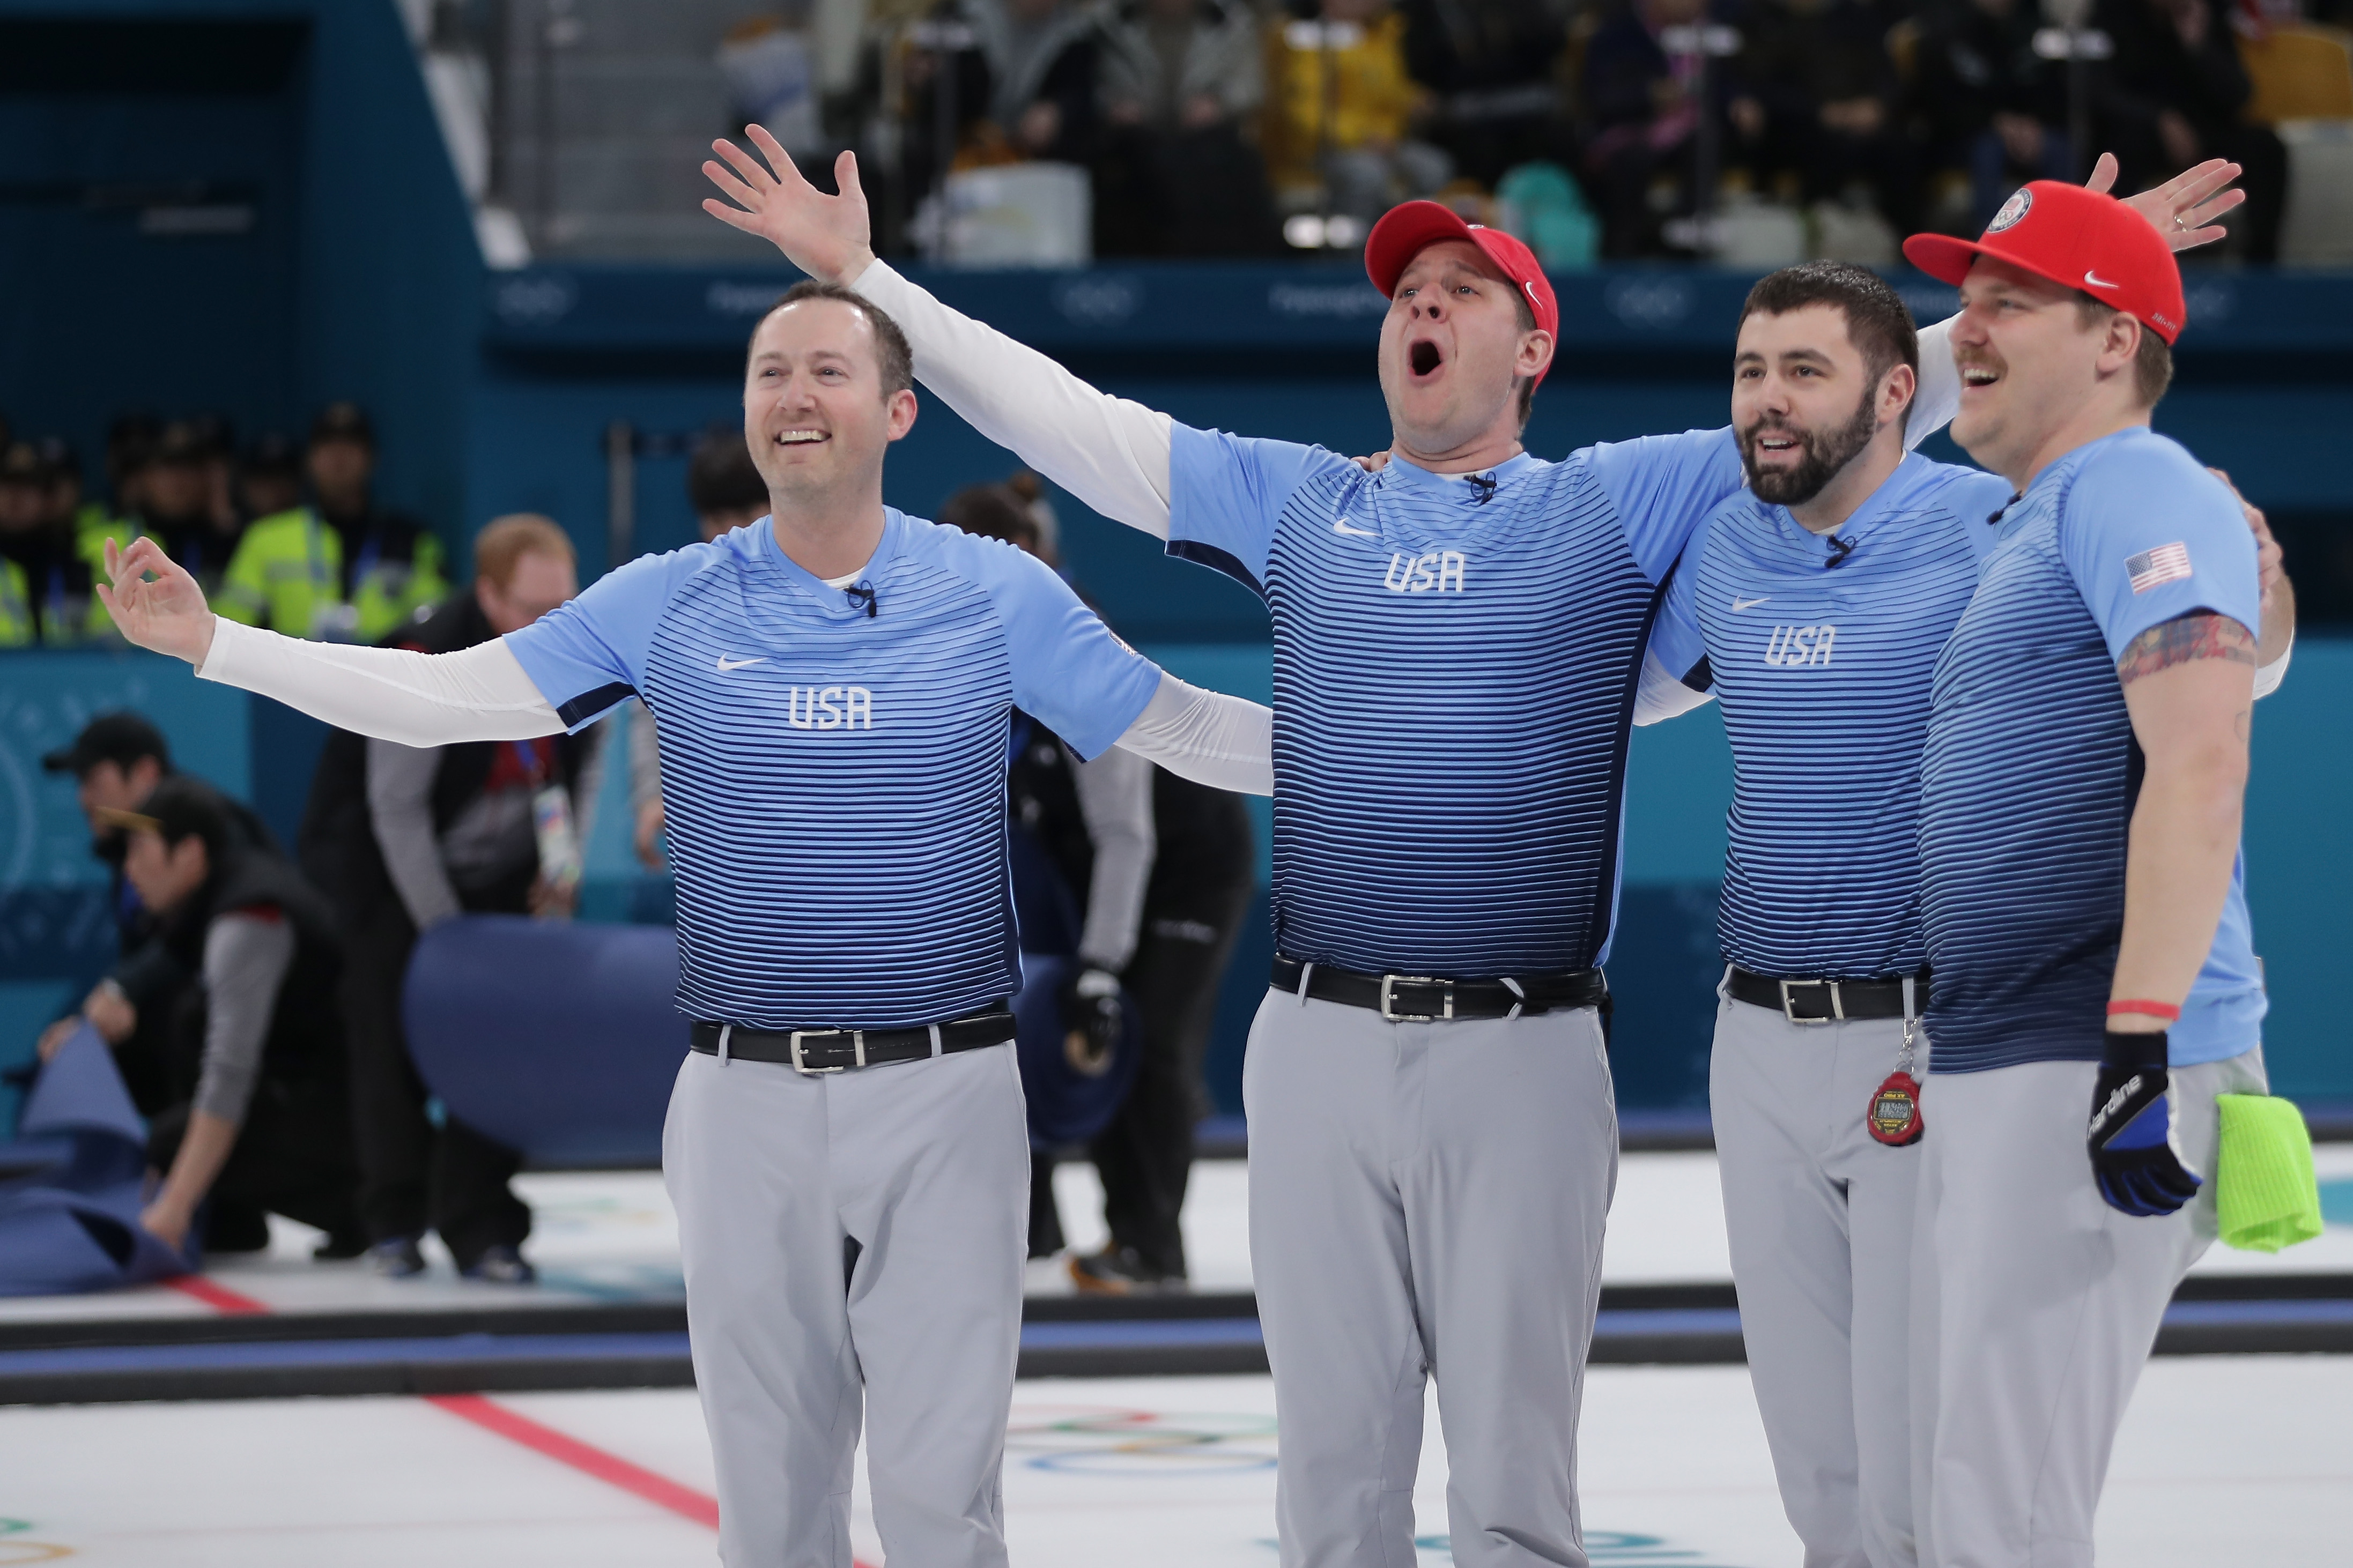 Team United States reacts after defeating Sweden 10-7 to win the Curling Men's Gold Medal game on day fifteen of the PyeongChang 2018 Winter Olympic Games at Gangneung Curling Centre on February 24, 2018 in Gangneung, South Korea (Richard Heathcote - Getty Images)